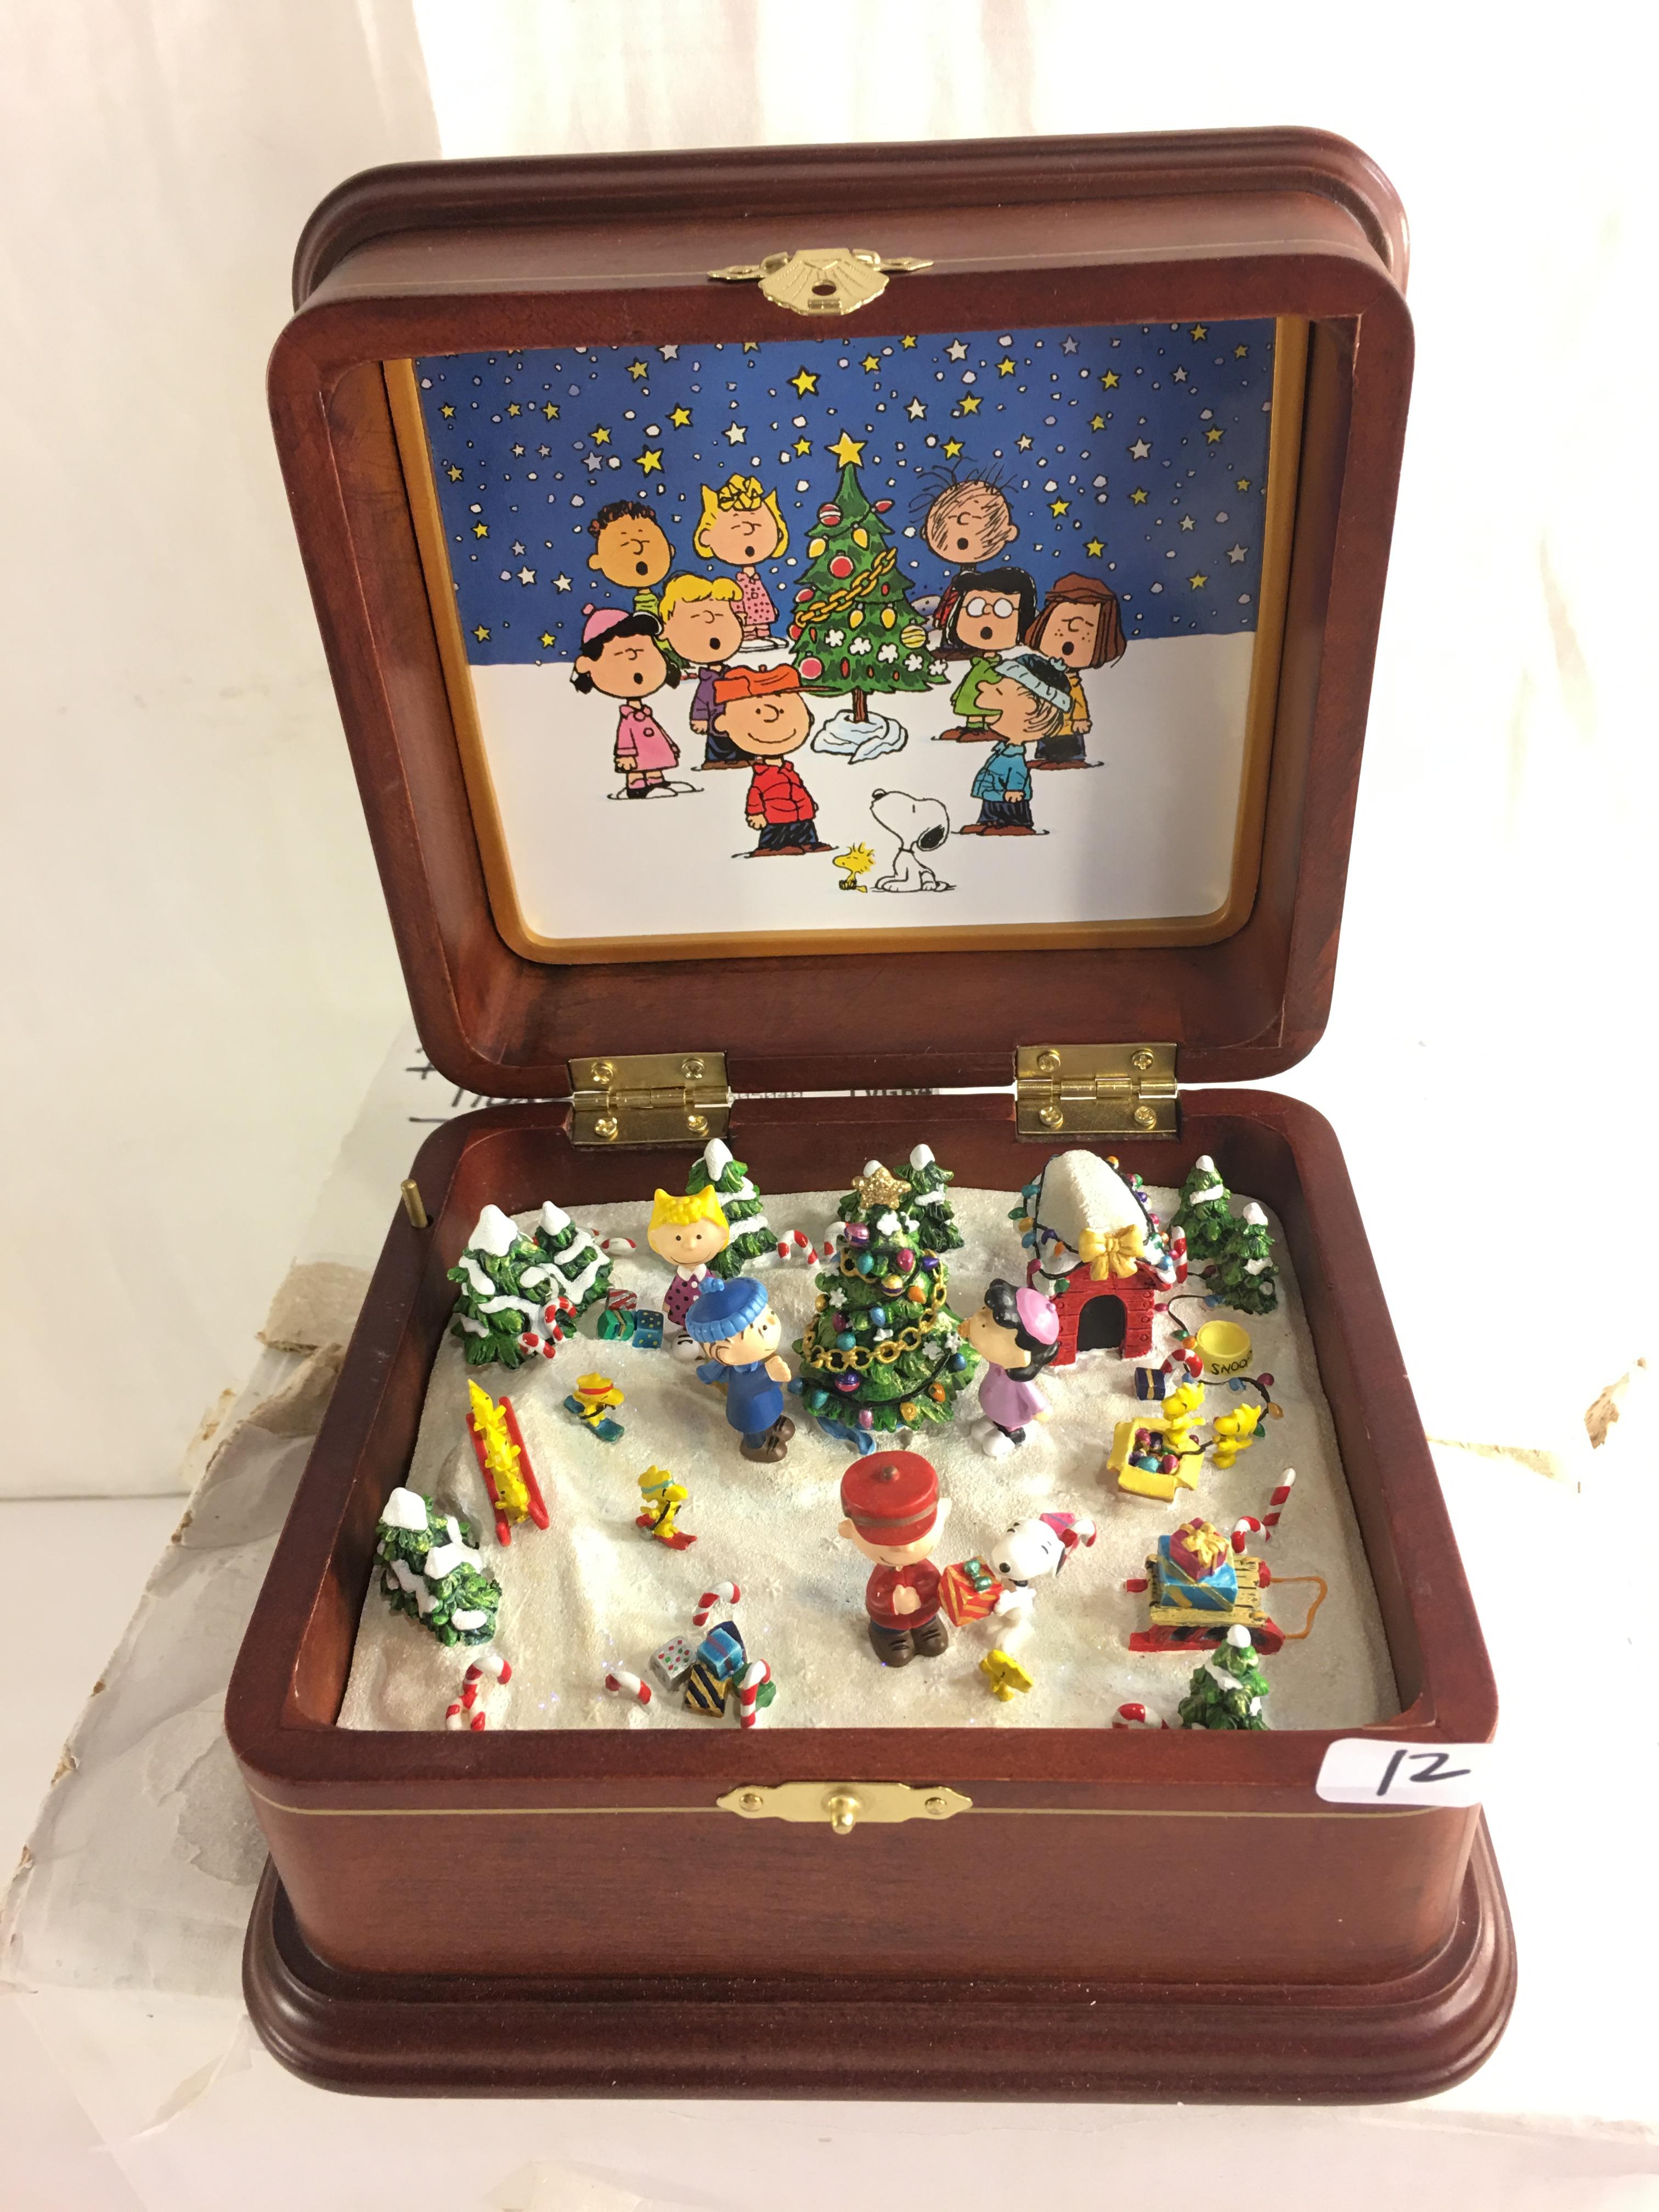 Collector The Danby Mint Peanuts Snoopy's Music Box Size: 10x8x9"